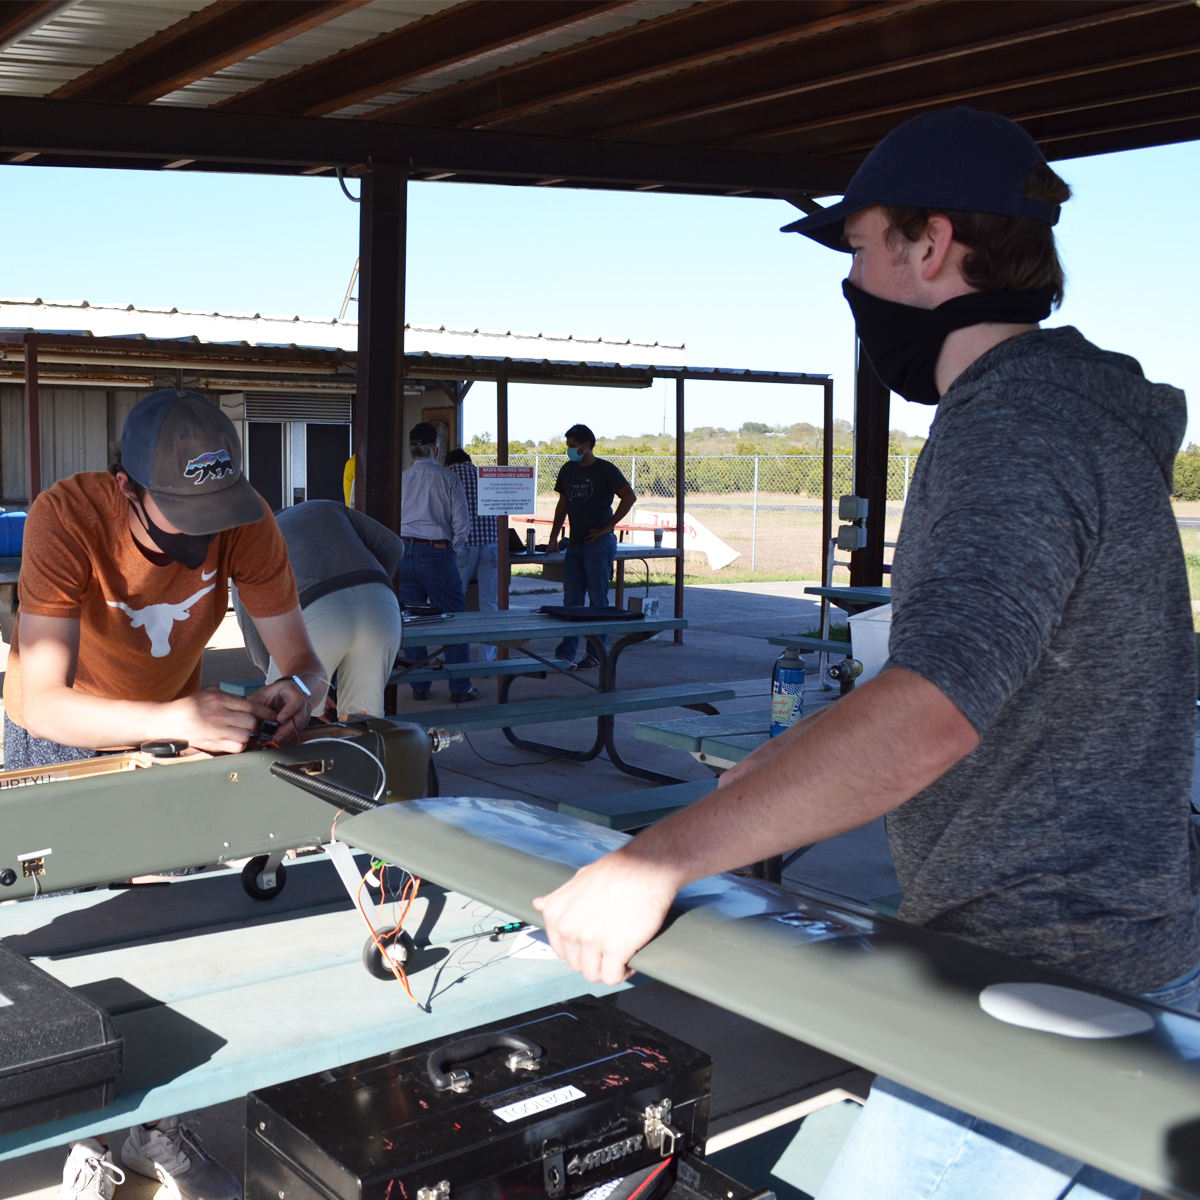 photo of students working on aircraft